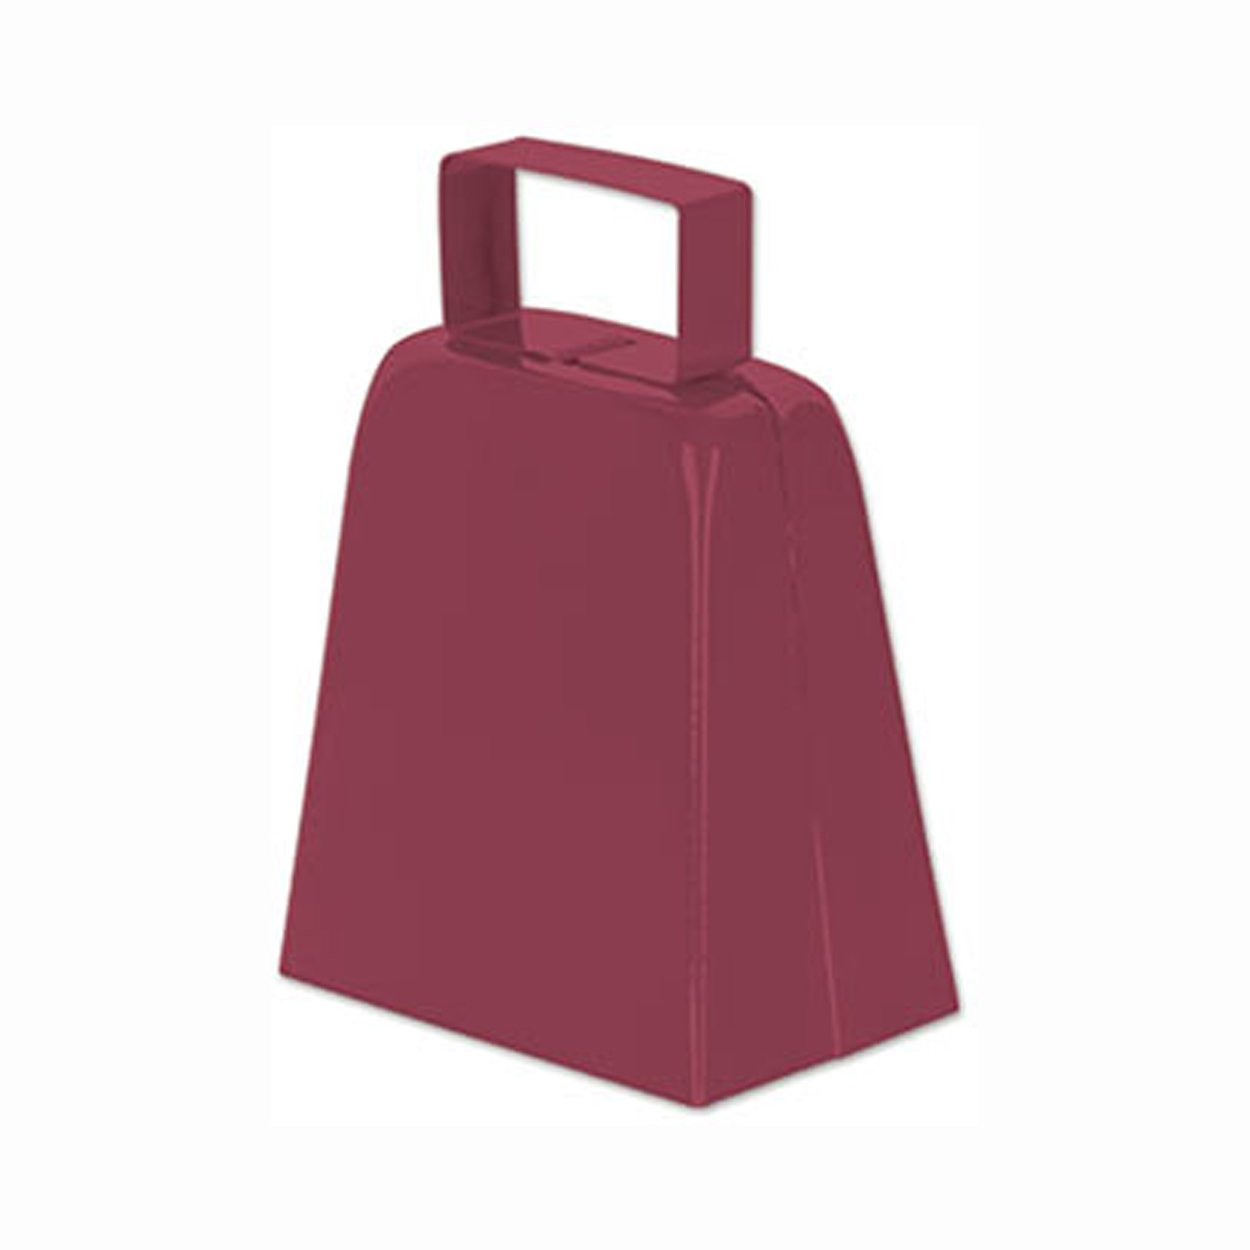 4" High Maroon Cowbell